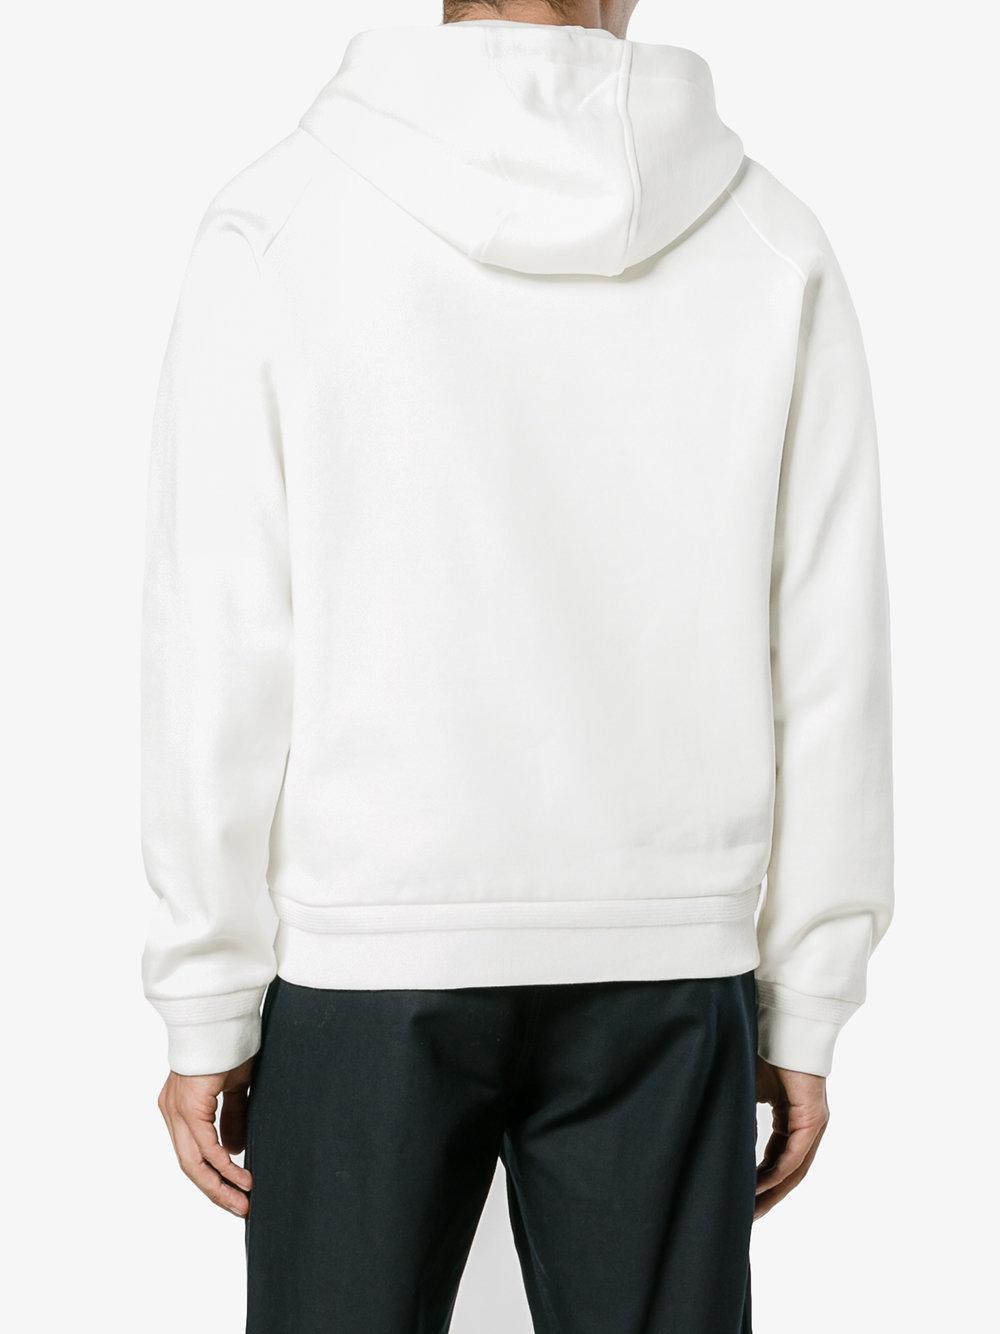 Moncler Cotton Logo Patch Zip-up Hoodie in White for Men - Lyst